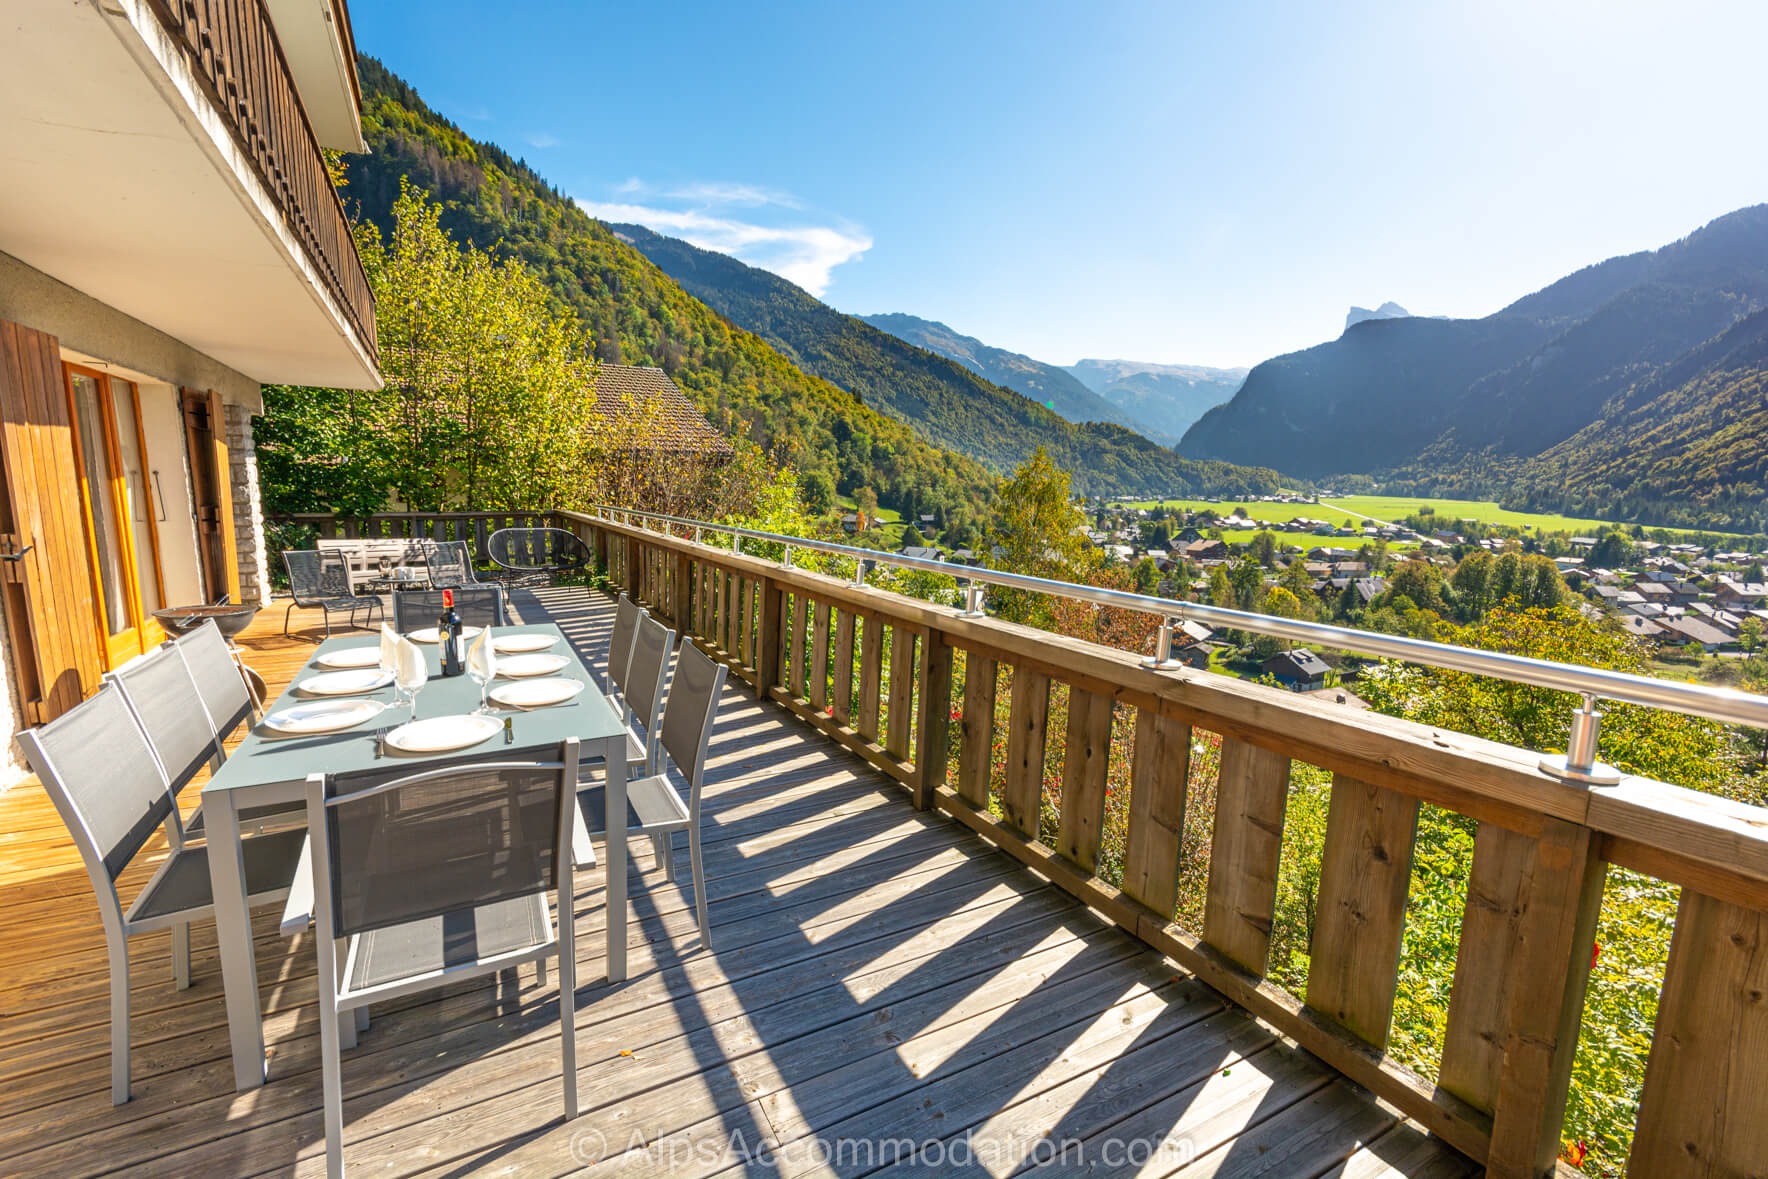 Apartment Falconnieres Samoëns - Sunny balcony with stunning views over Samoens